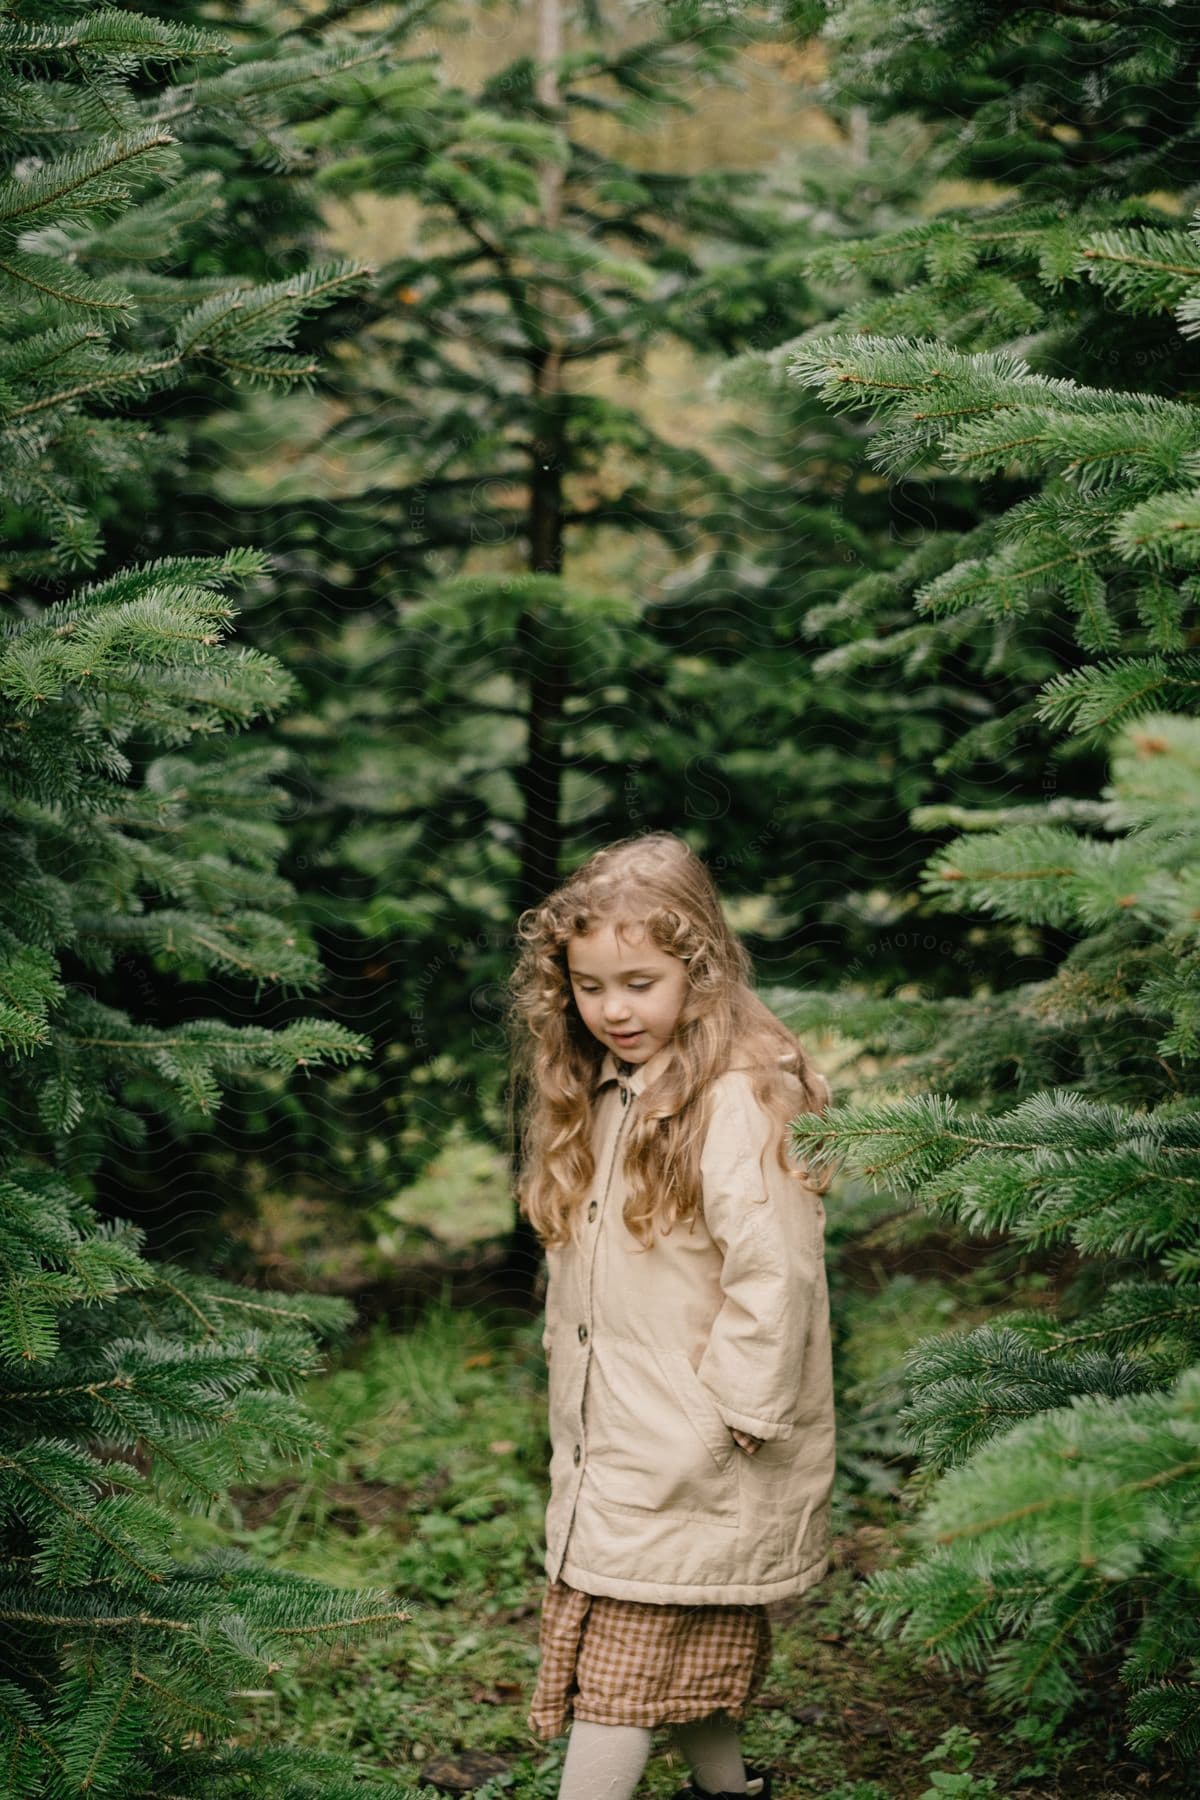 Little girl wearing a rain coat standing in front of trees looking down in an exterior location during the day